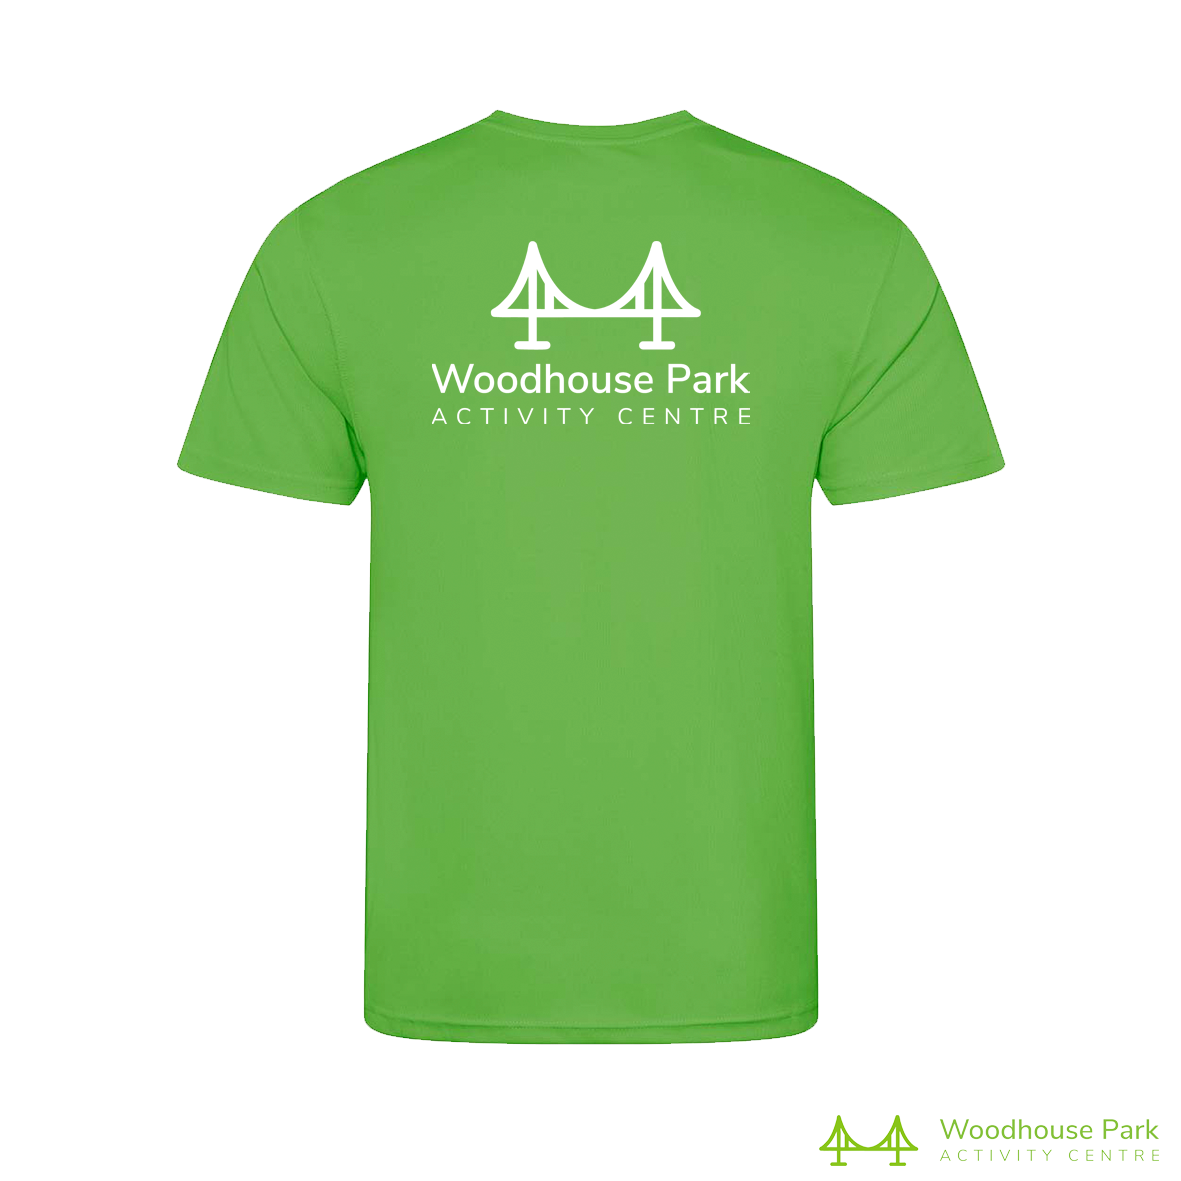 Woodhouse Park Tee - Cool Wicking